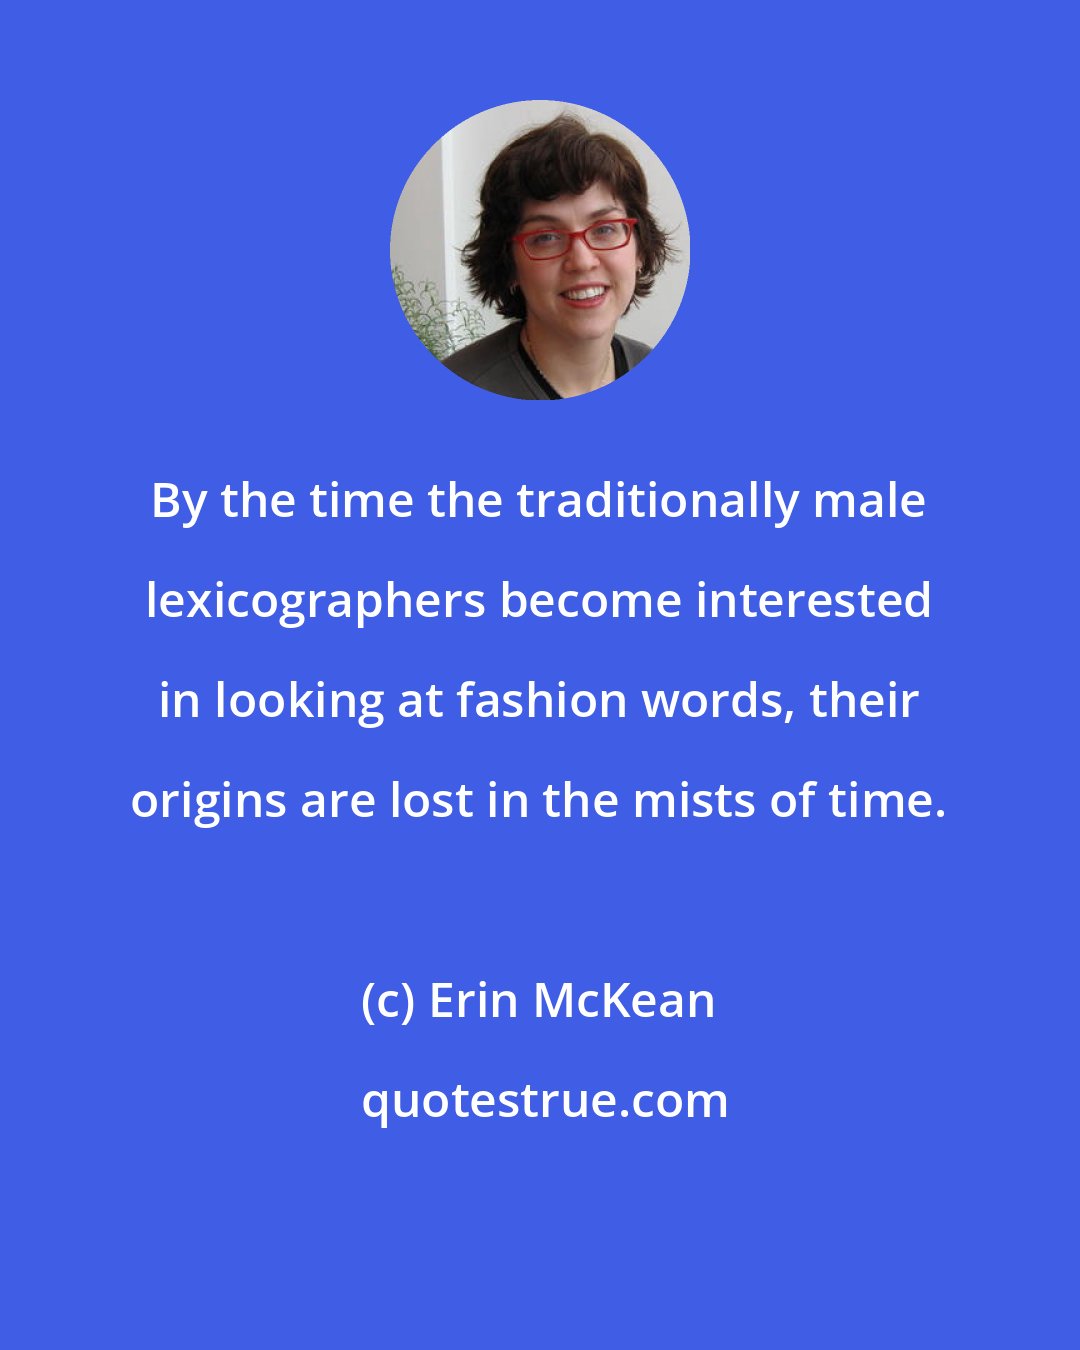 Erin McKean: By the time the traditionally male lexicographers become interested in looking at fashion words, their origins are lost in the mists of time.